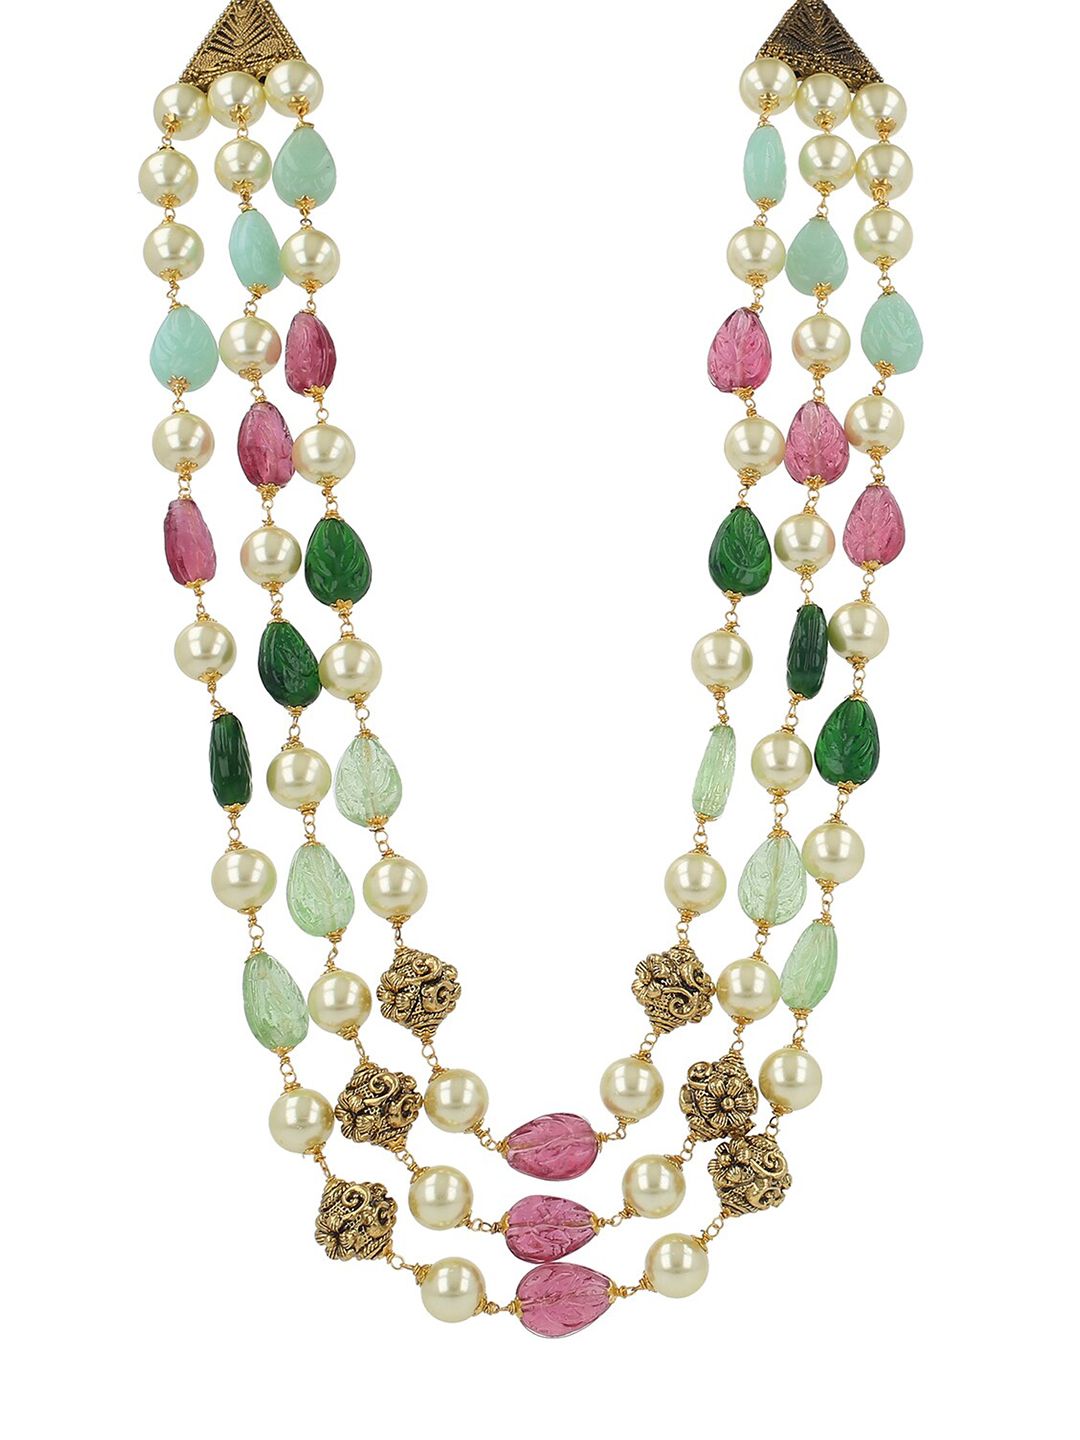 Ishhaara White & Green Brass Brass-Plated Handcrafted Necklace Price in India